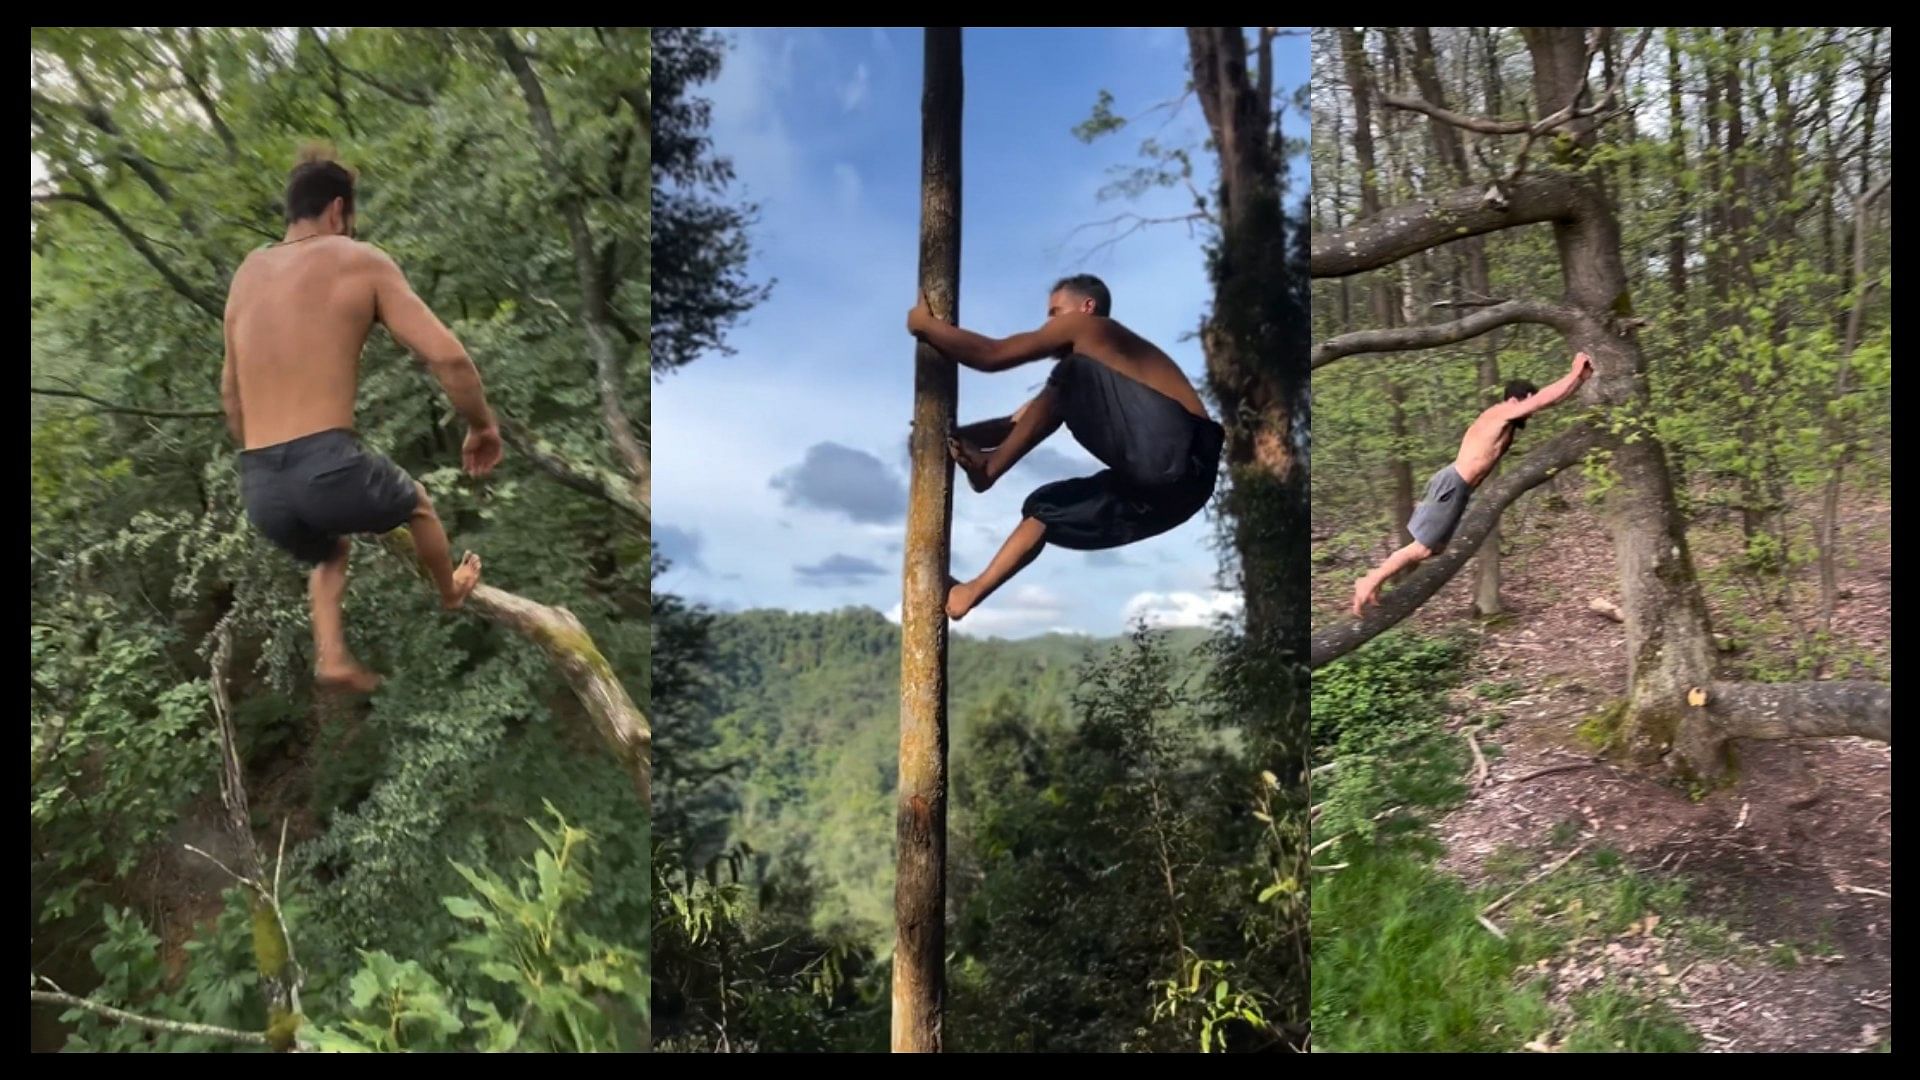 This man is real life tarzan who jumps and climbs trees like monkeys video goes viral on social media